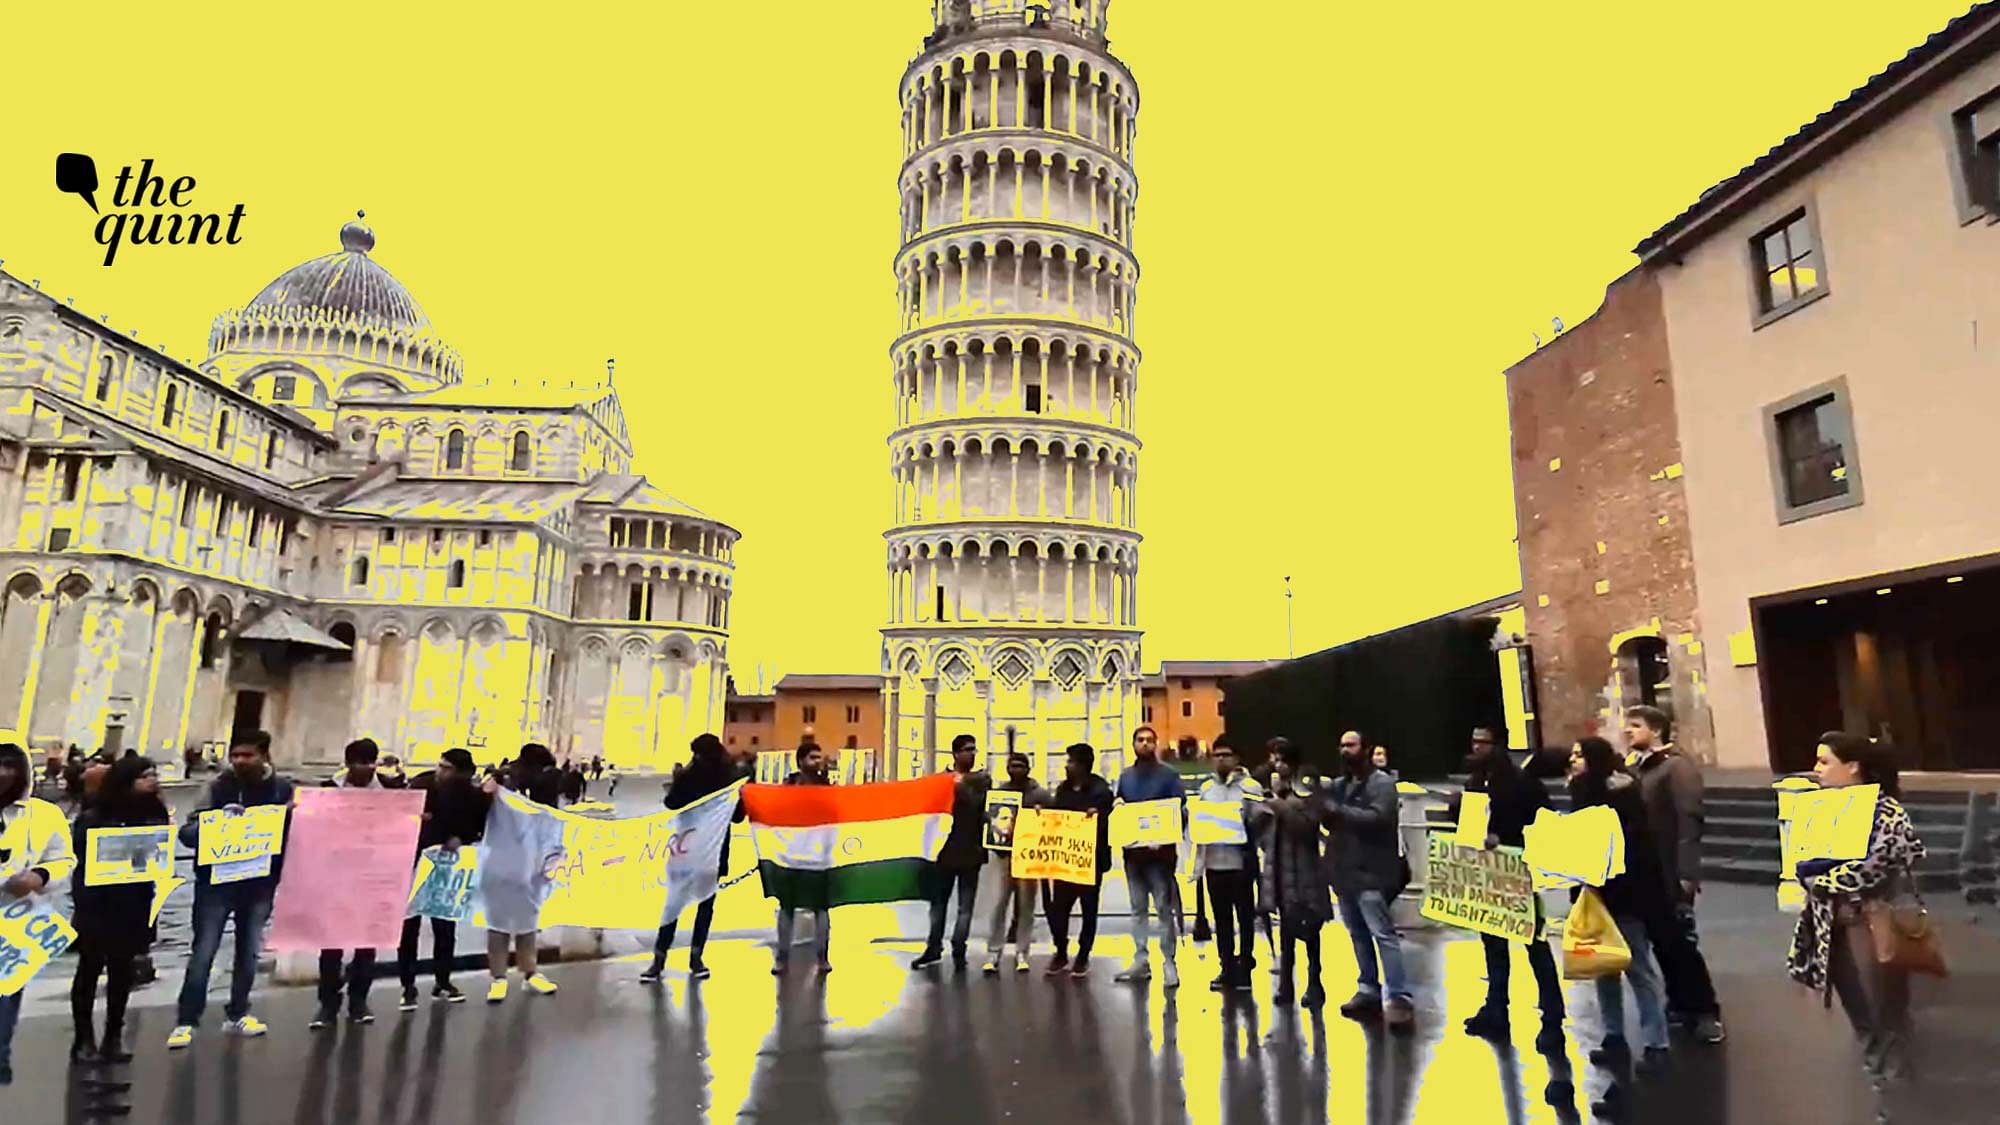 On 1 February, researchers, students in Italy came together at the Leaning Tower of Pisa to protest against CAA, NRC and stand in solidarity with Shaheen Bagh and universities